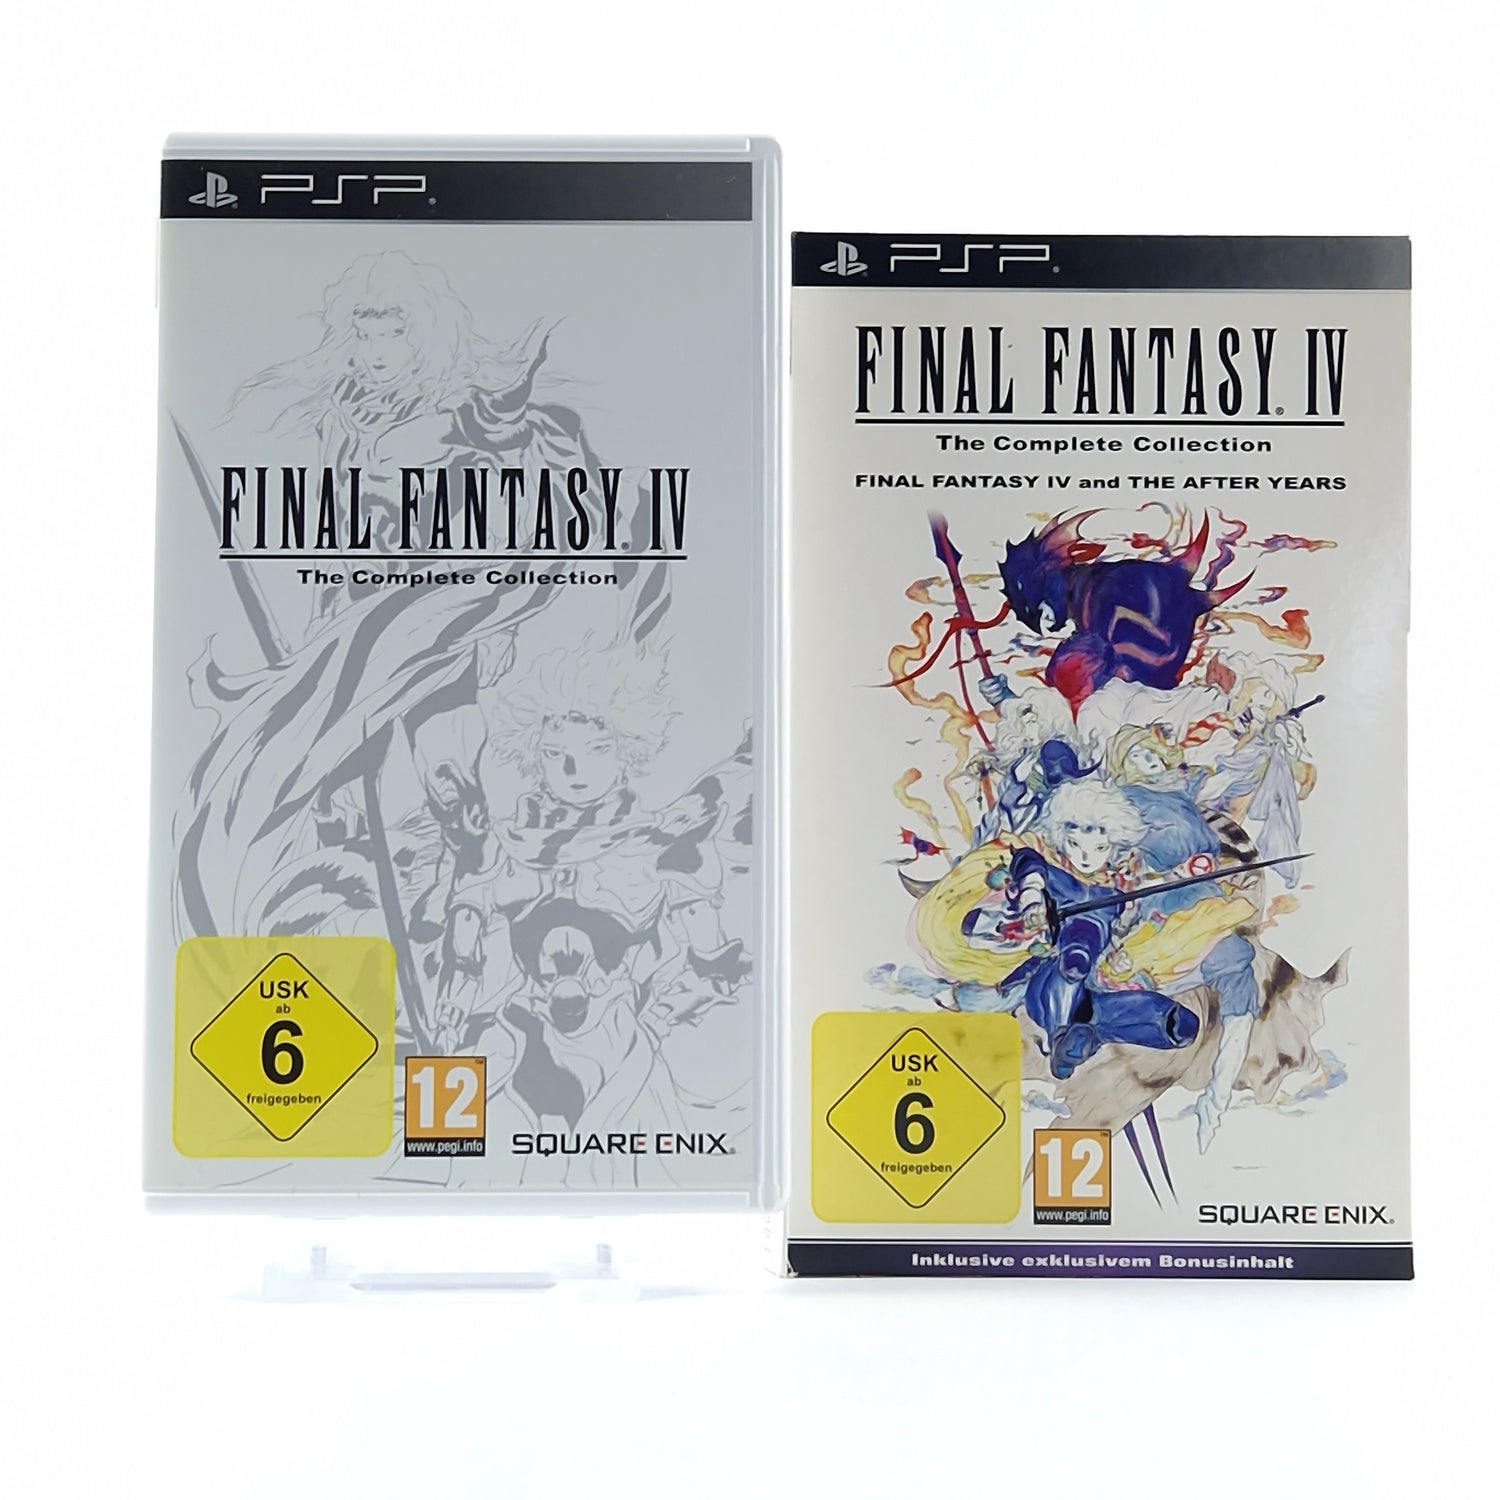 Playstation Portable Game: Final Fantasy IV Complete Edition - OVP / SONY PSP